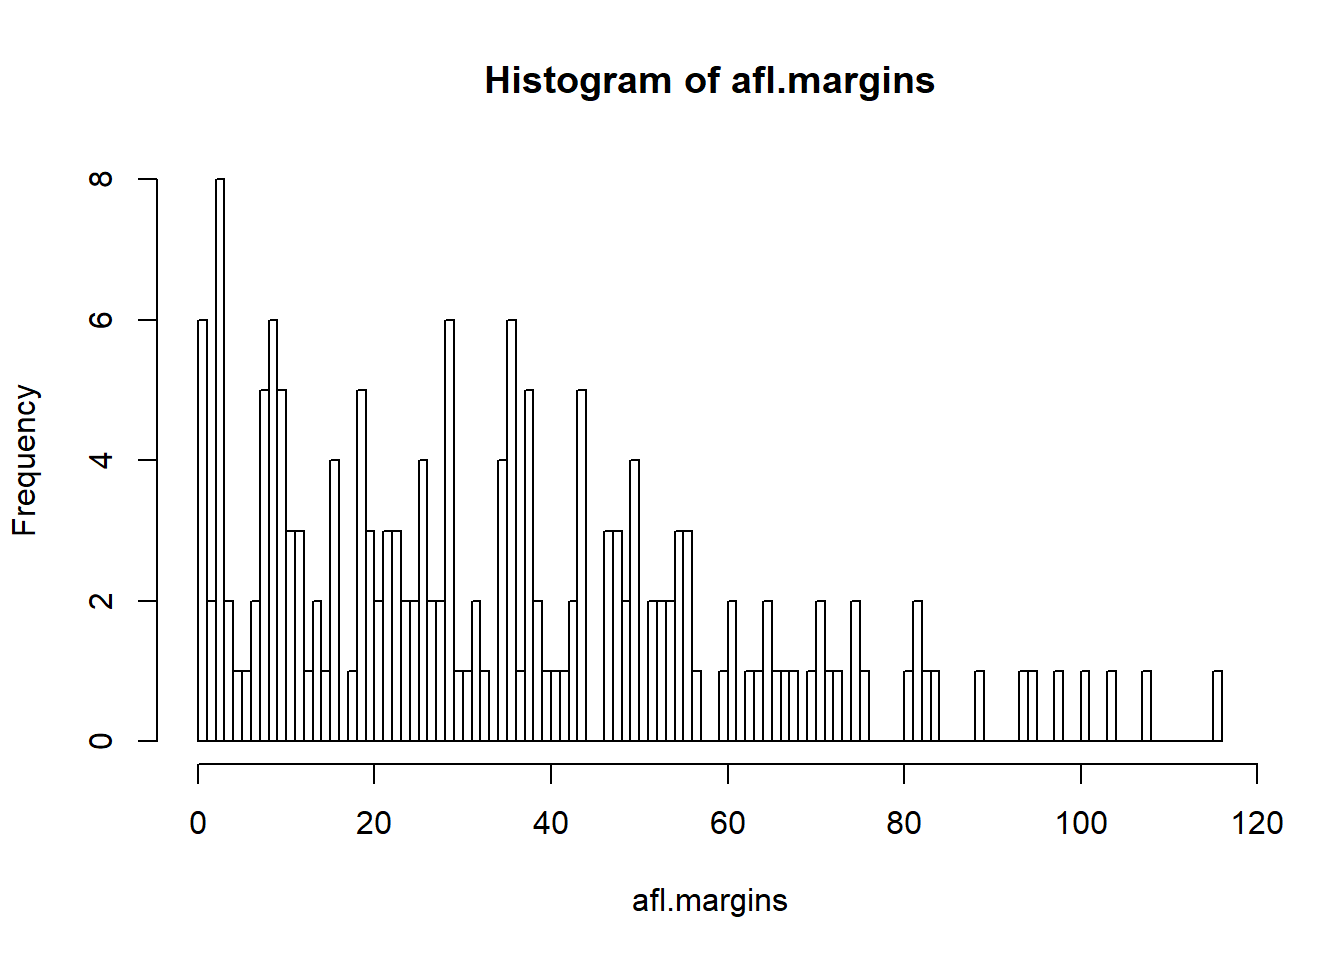 A histogram with too many bins